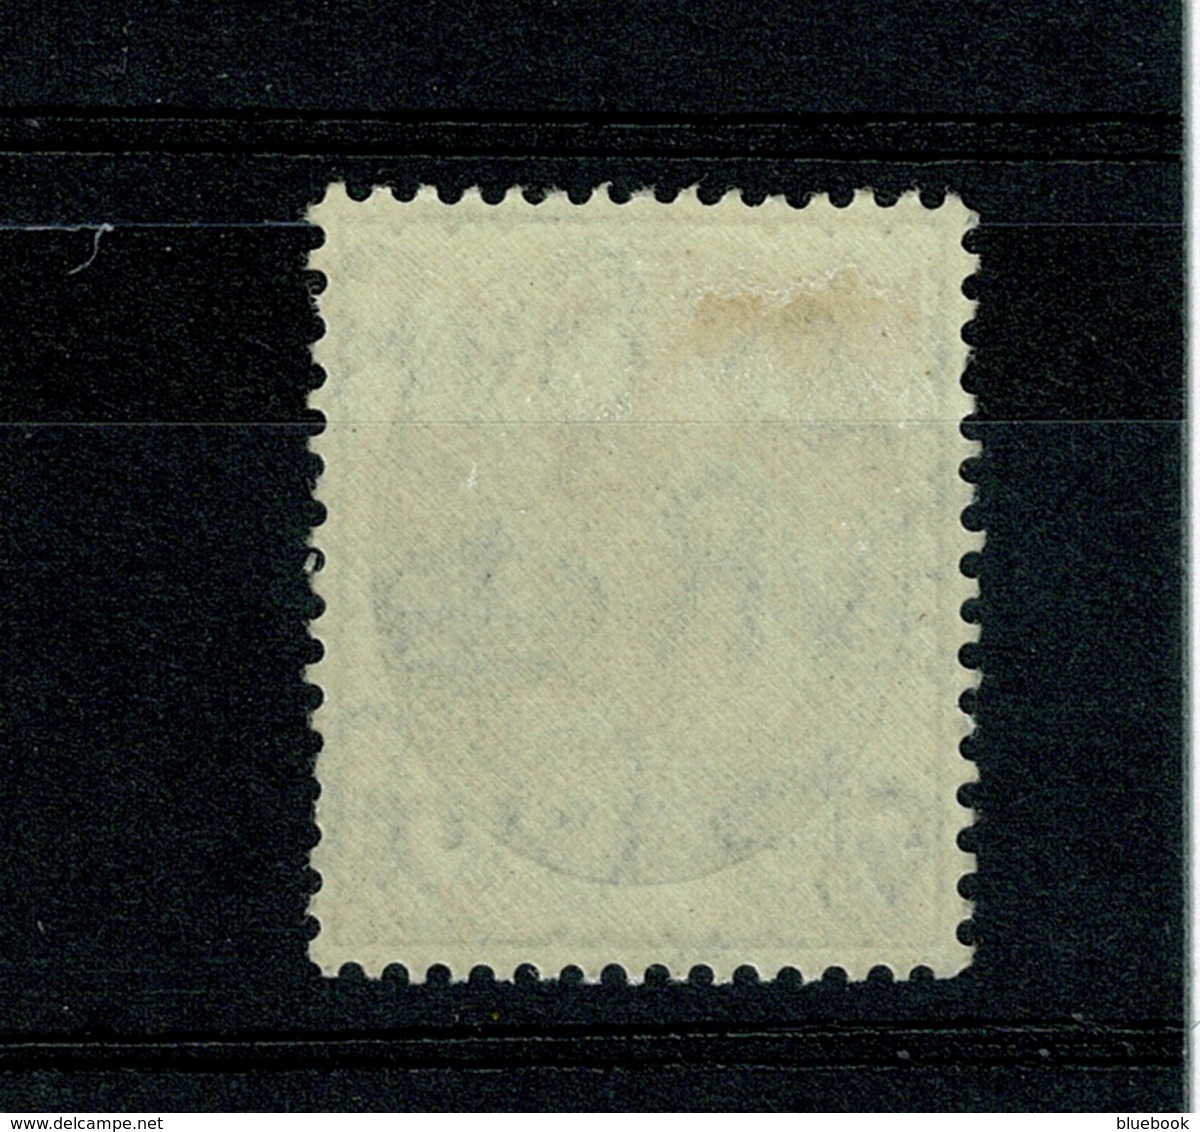 Ref 1337 - GB Stamps - KGV 2 1/2d PUC SG 437 - Lightly Mounted Mint Stamp - Neufs